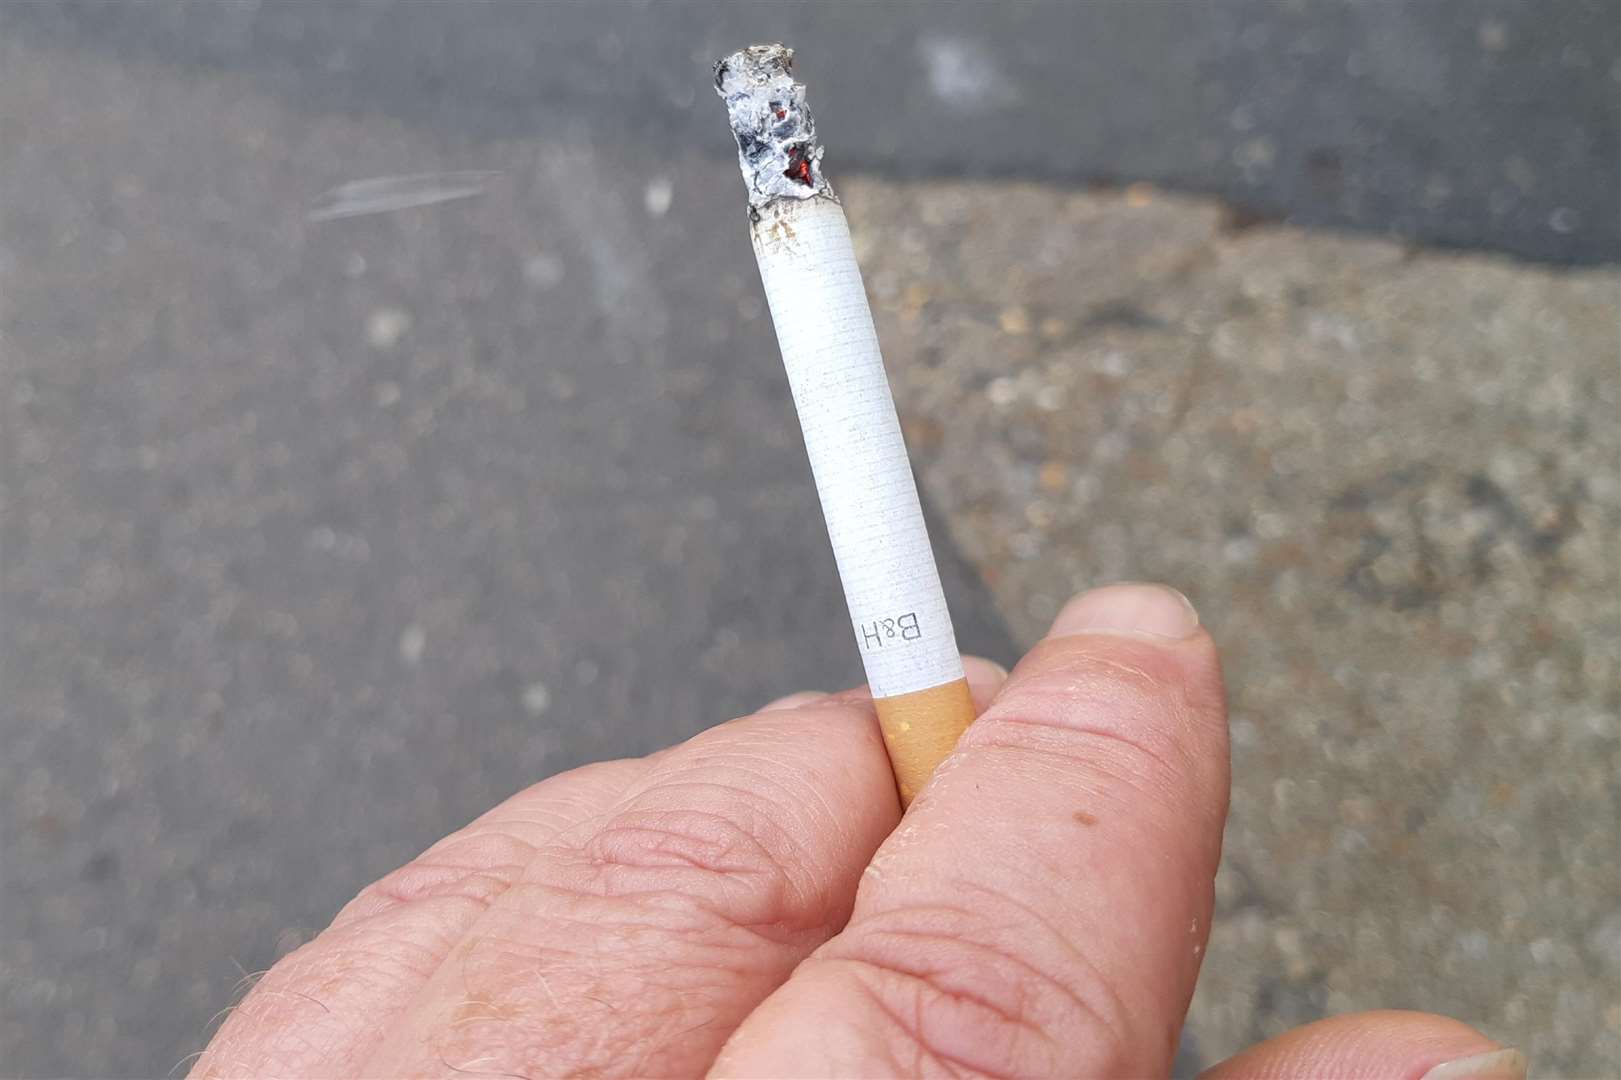 Smokers were fined for discarding ther cigarettes as litter. Library picture